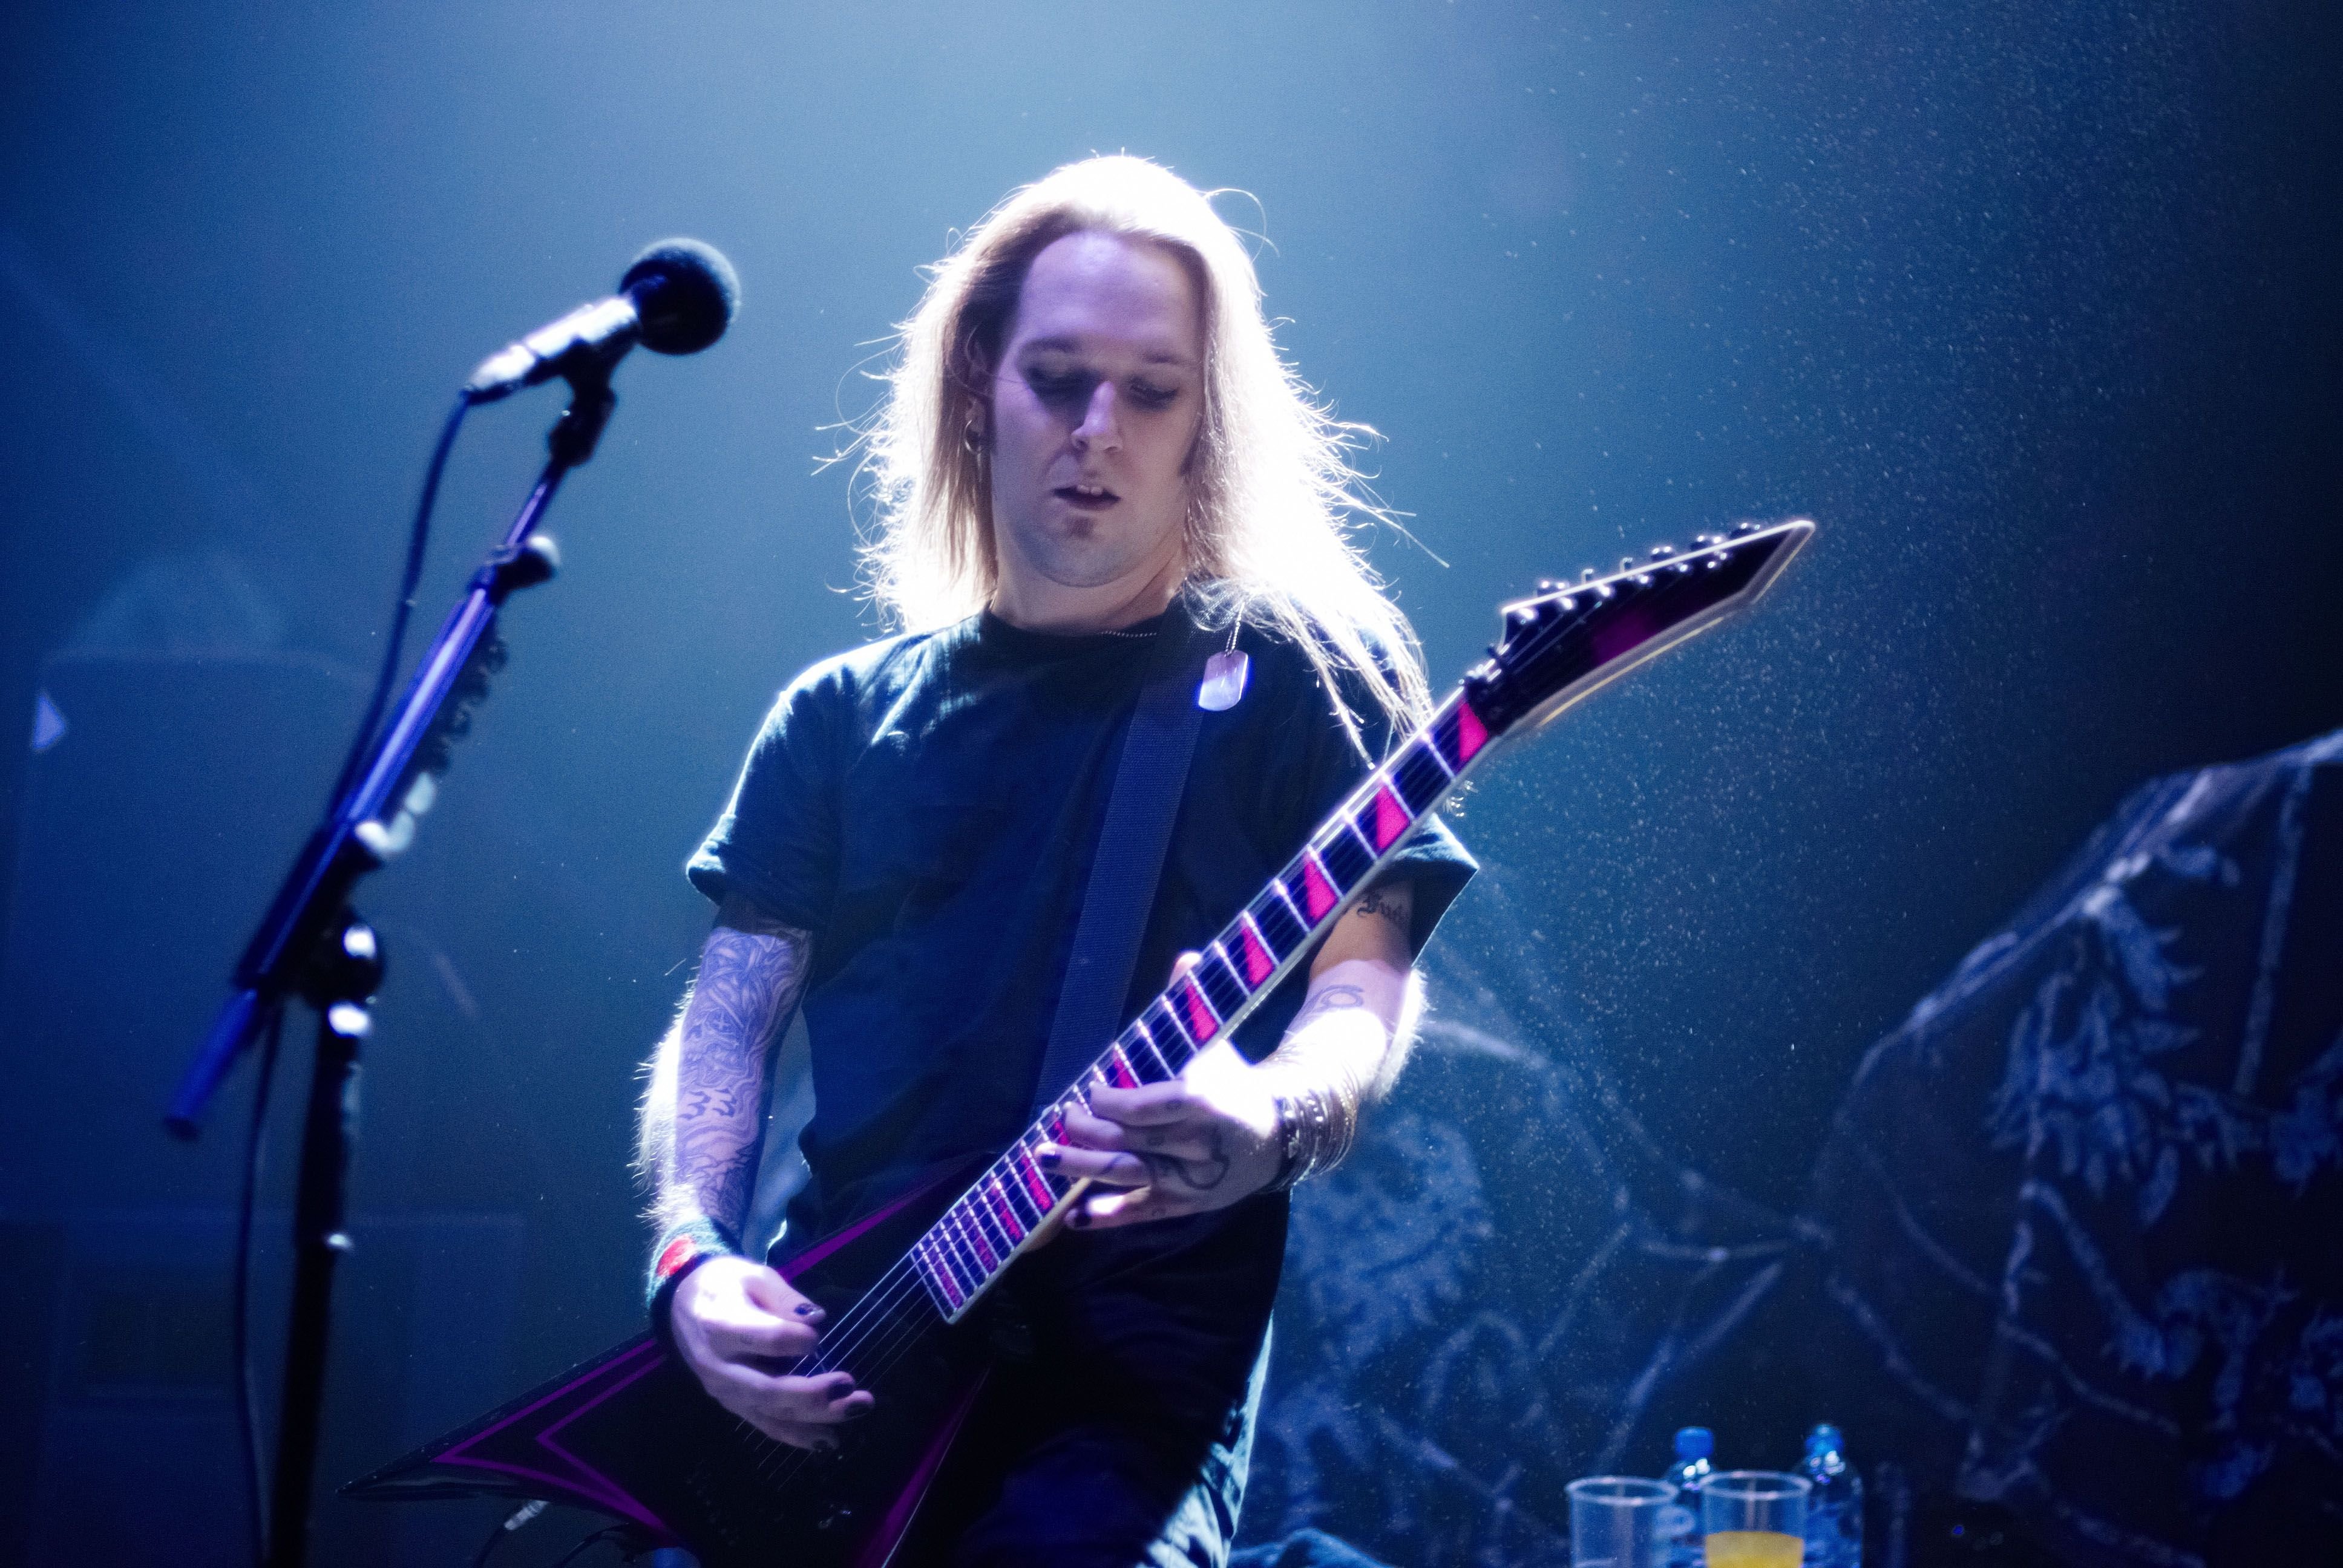 Alexi Laiho performing on stage on December 12, 2008 | Photo: Getty Images